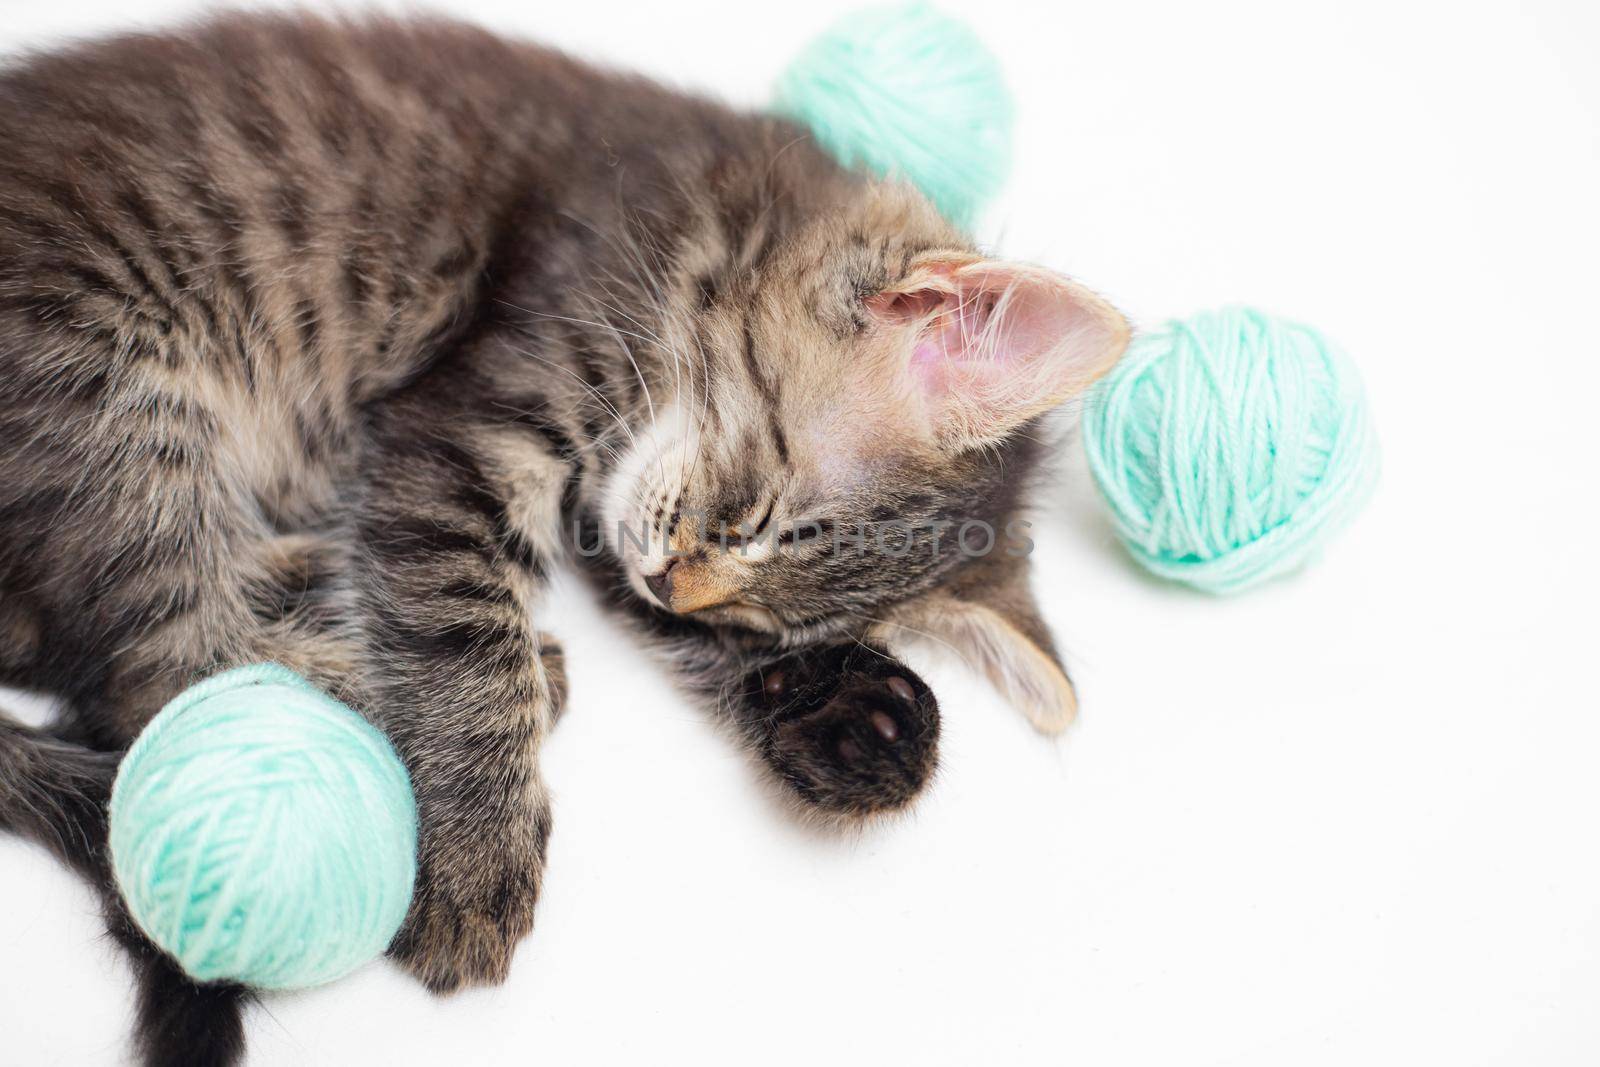 Striped cat with blue balls, skeins of thread on a white bed. An article about kittens. An article about pets. A curious little kitten sleeping over a white blanket